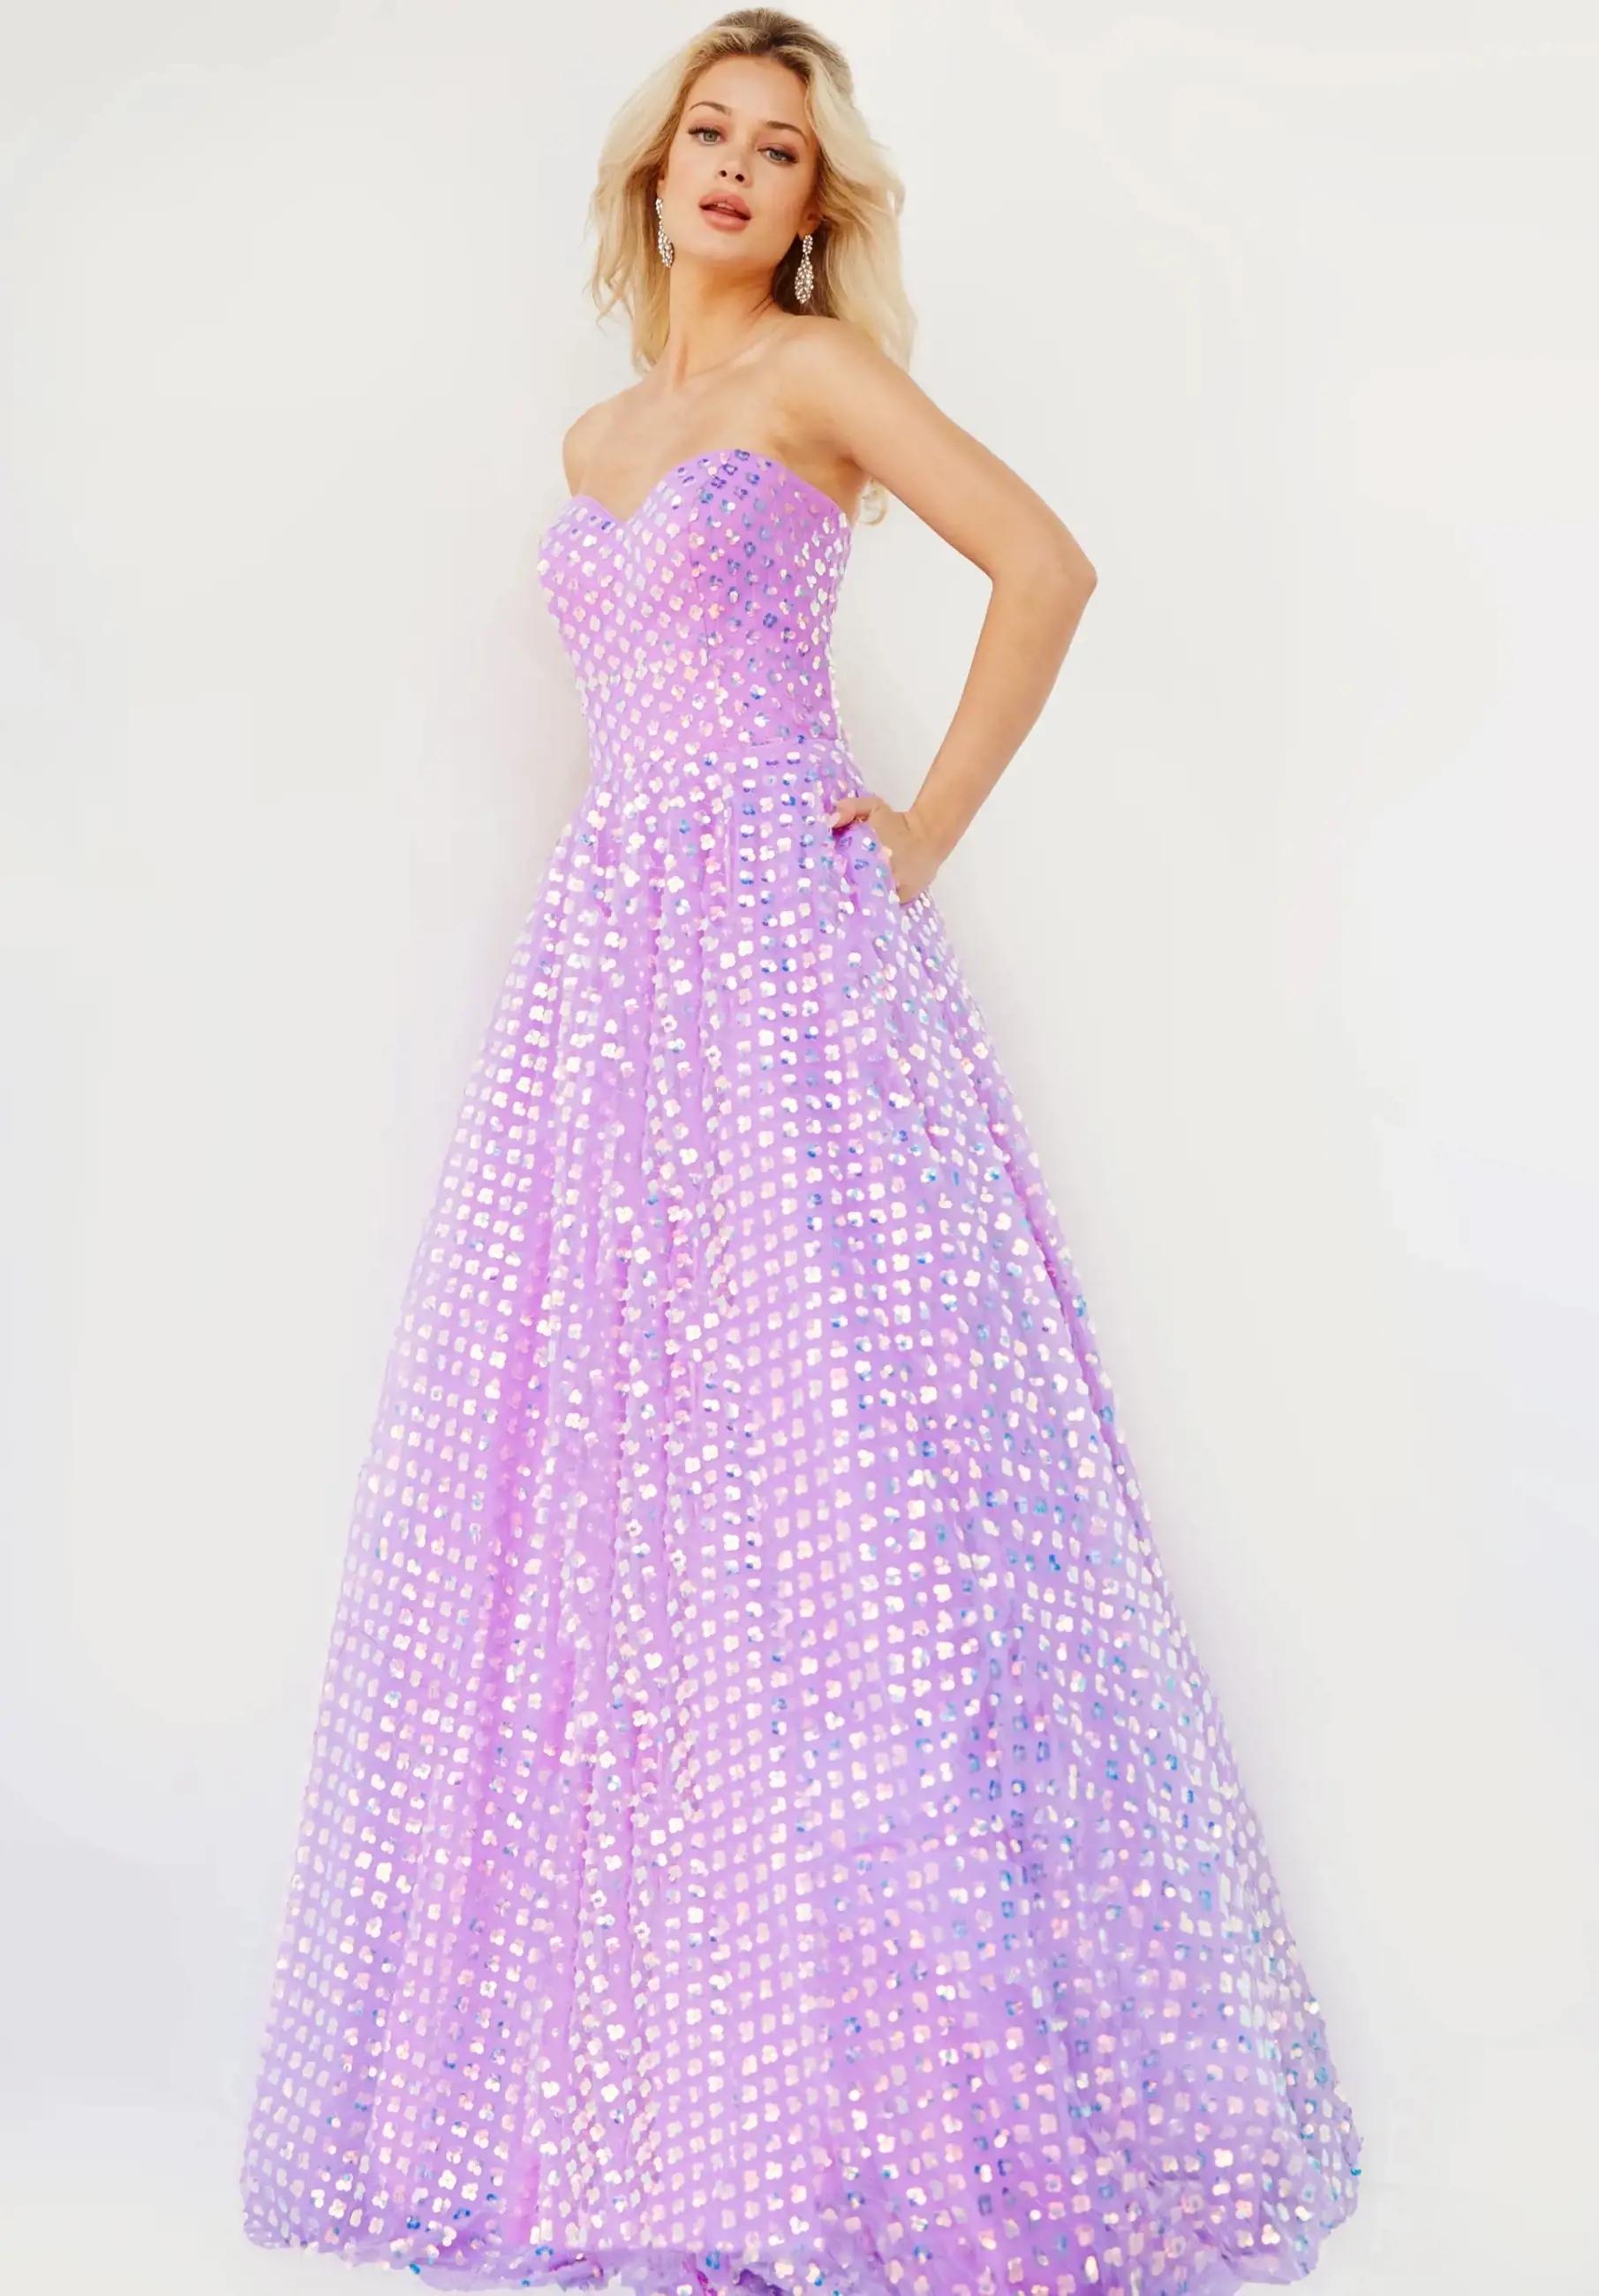 5 Gorgeous Prom Trends That Will Win In 2023 - Jovani Image